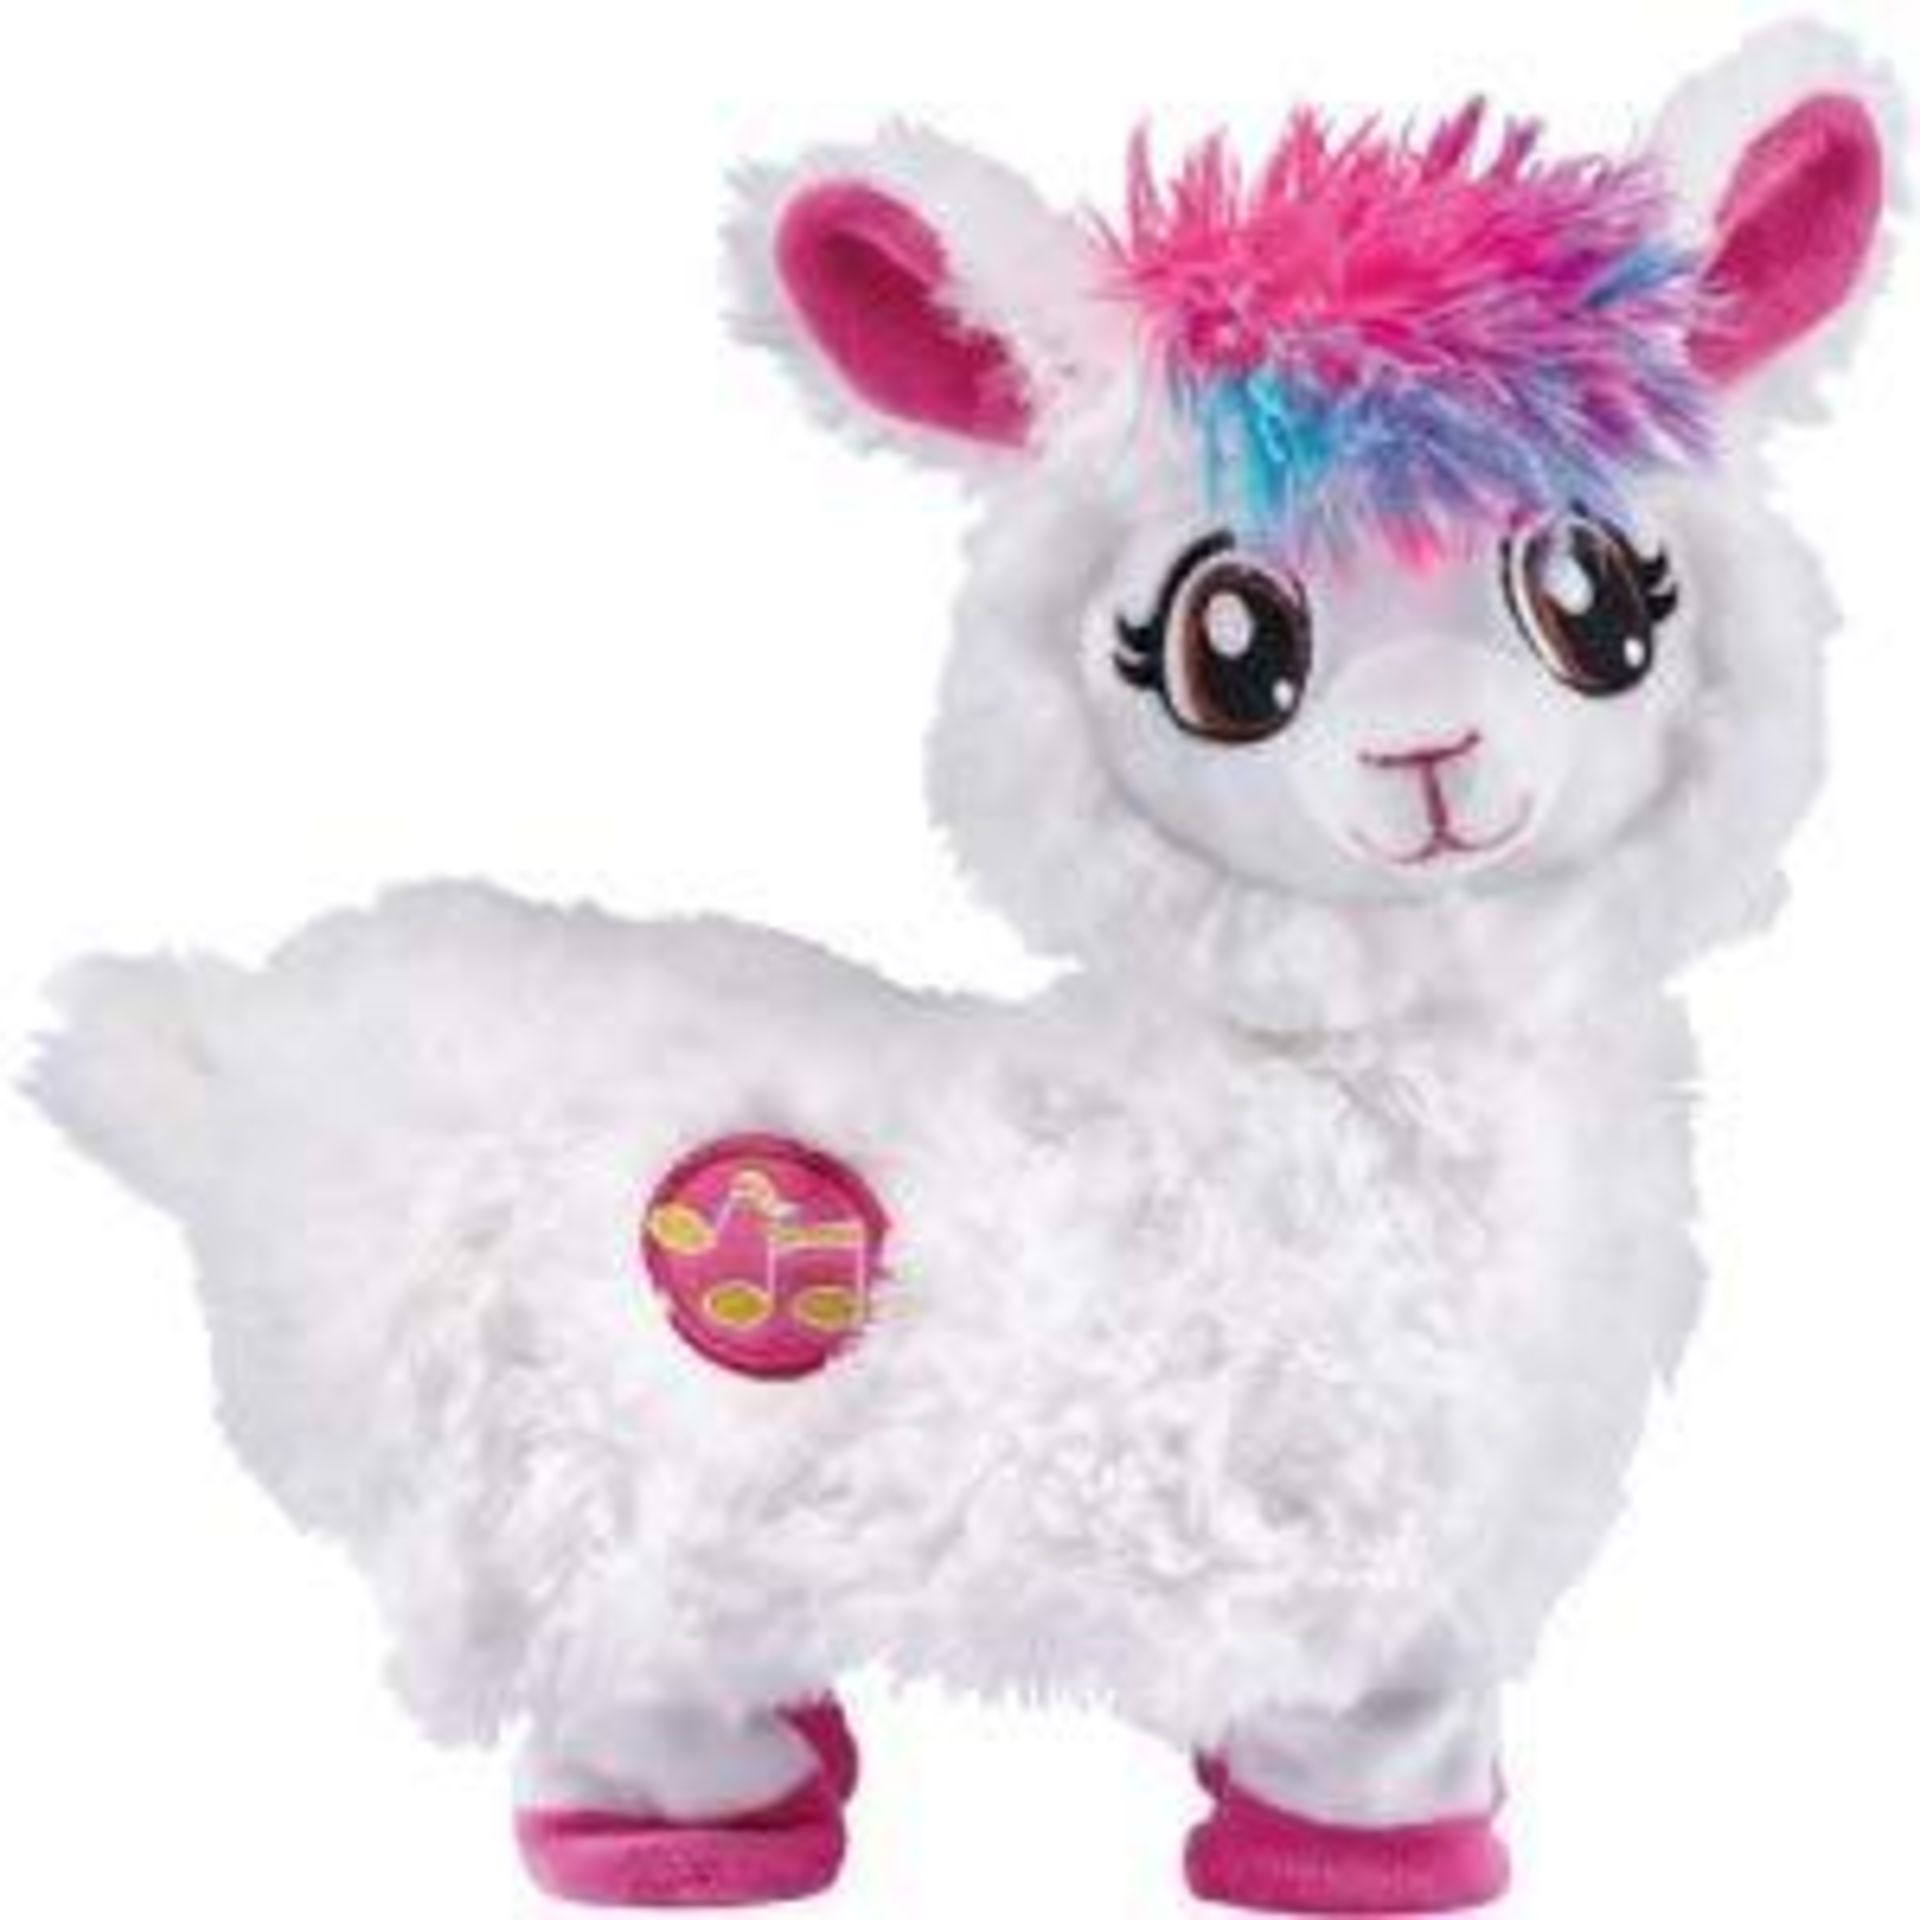 Pets Alive Boppi The Booty Shakin Llama Battery-Powered Dancing Robotic Toy by Zuru £19.97 RRP